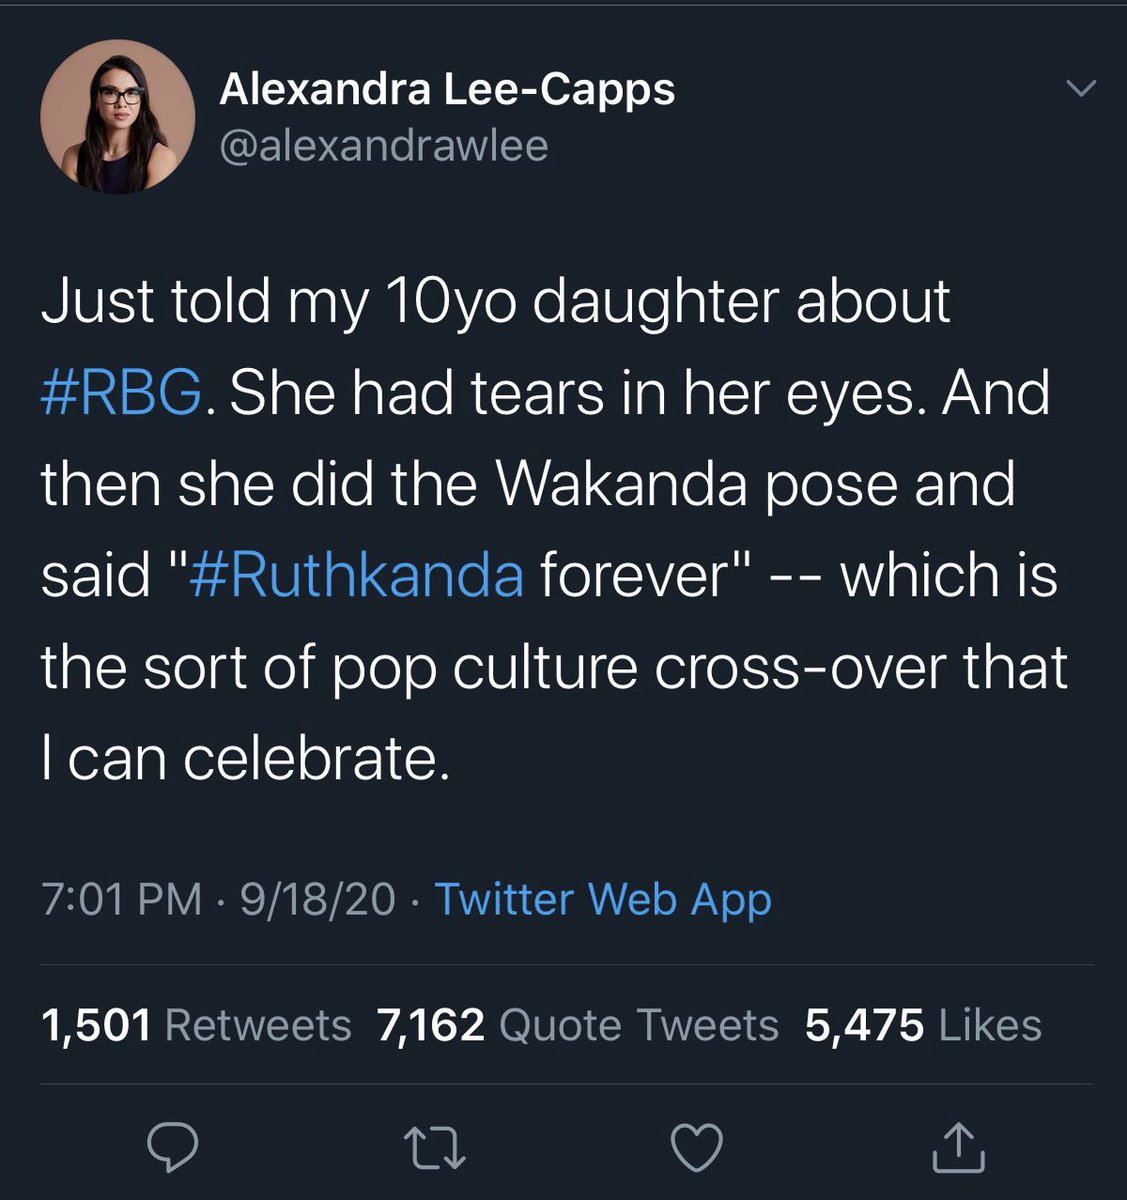 worst tweets of all time - screenshot - Alexandra LeeCapps Just told my 10yo daughter about . She had tears in her eyes. And then she did the Wakanda pose and said " forever" which is the sort of pop culture crossover that I can celebrate. 91820 Twitter W